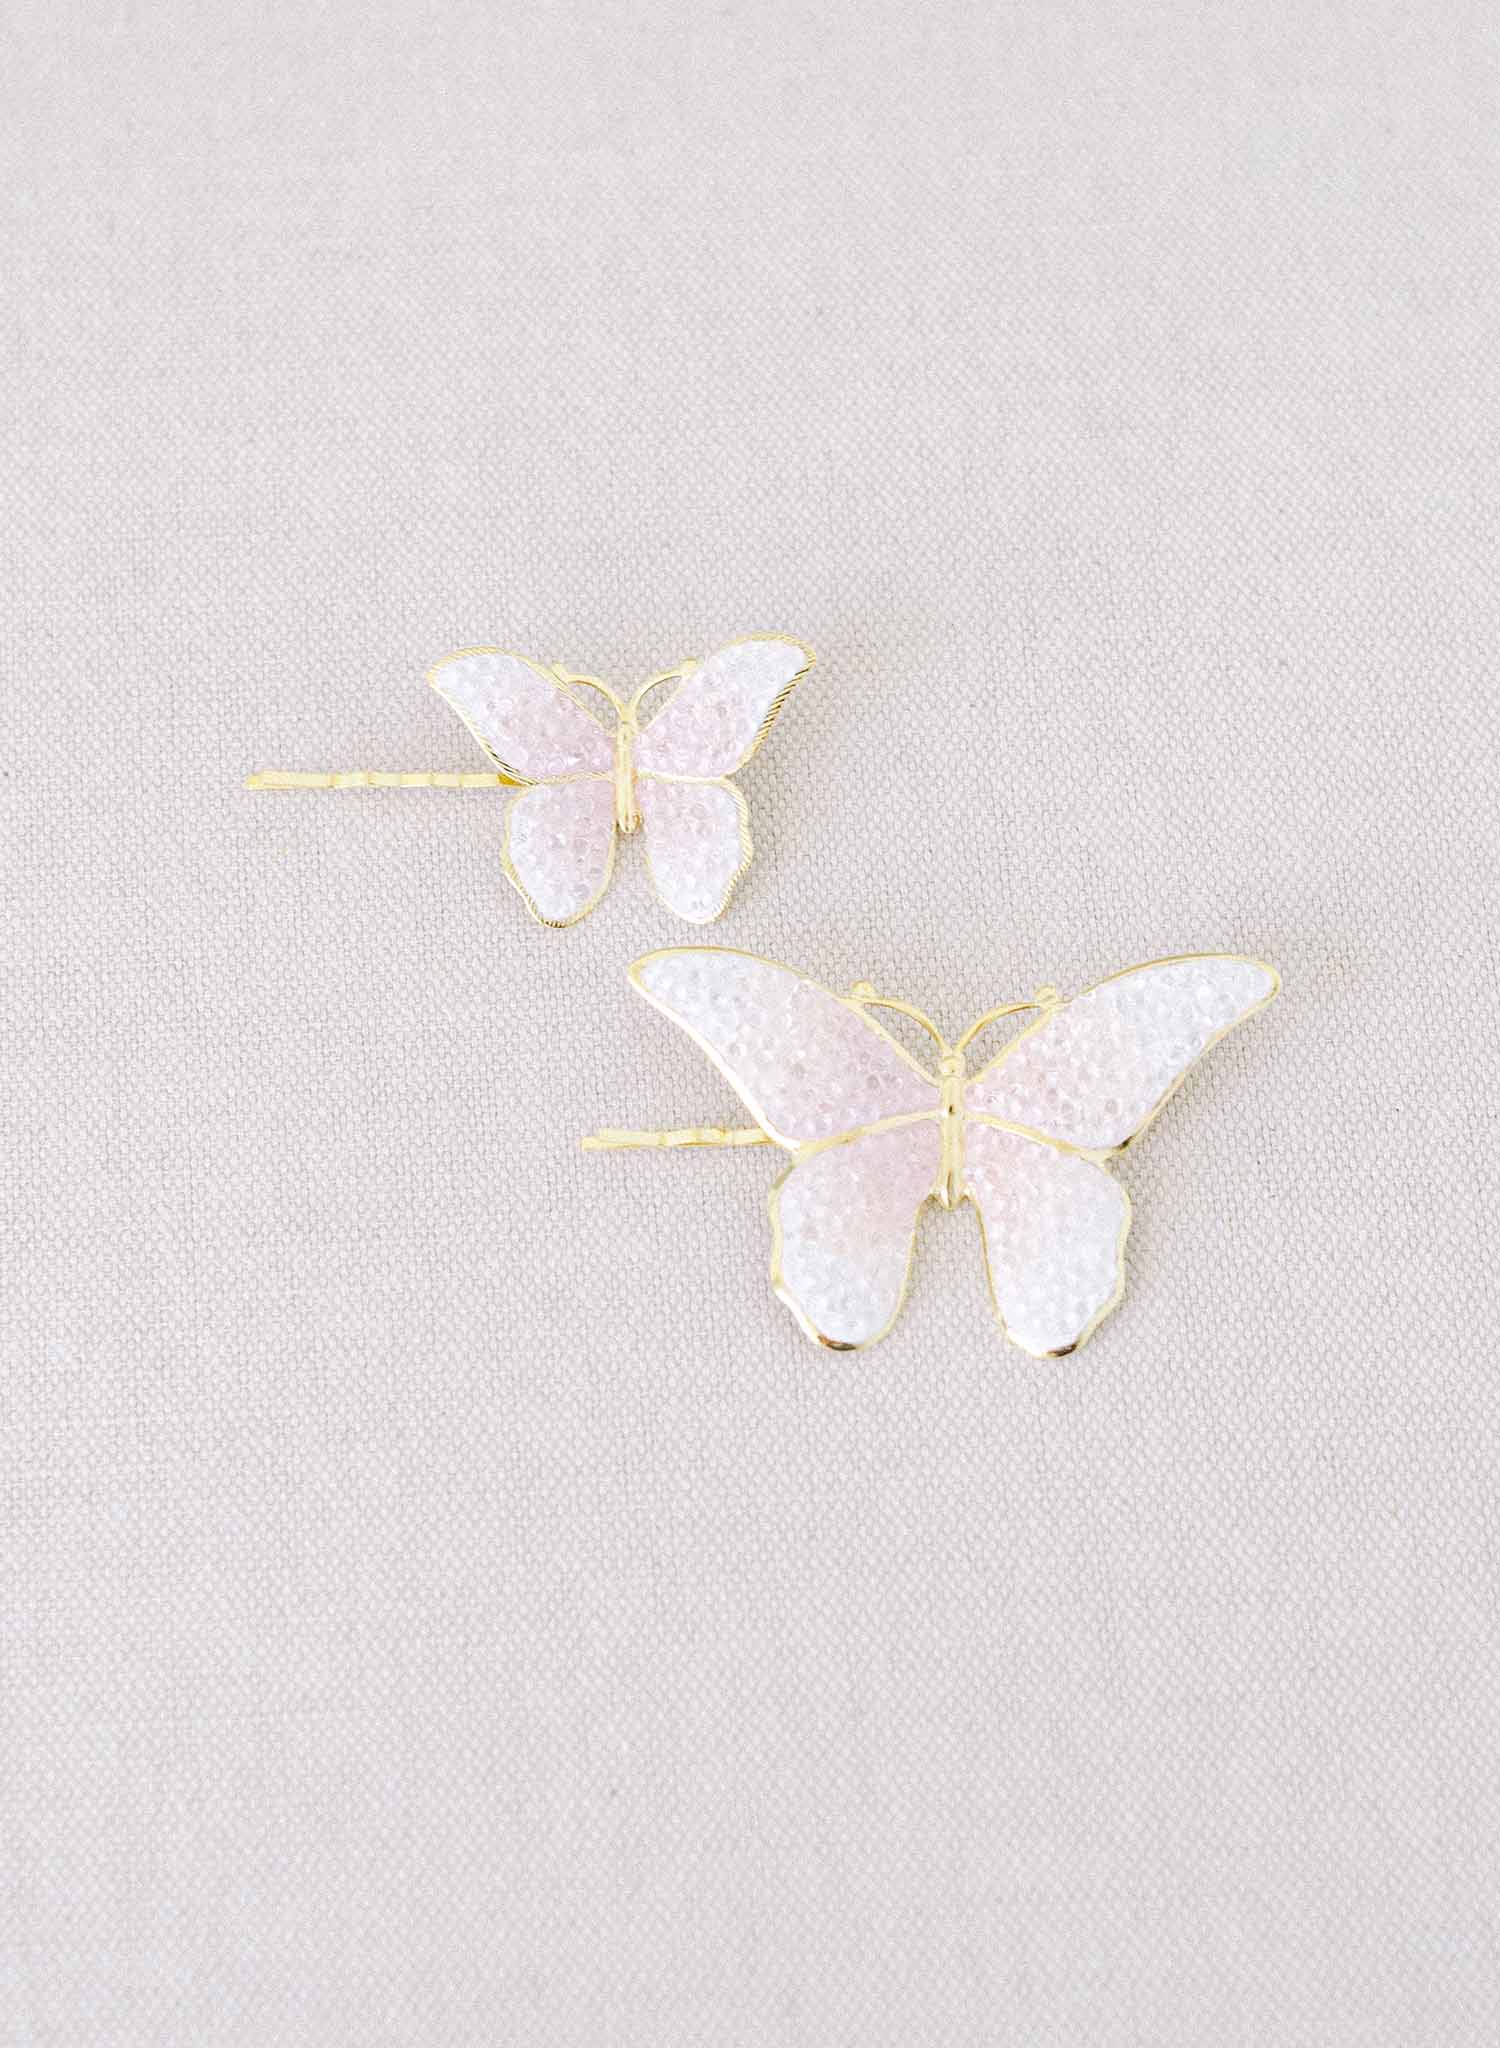 Gold Finish Butterfly Pin - pins